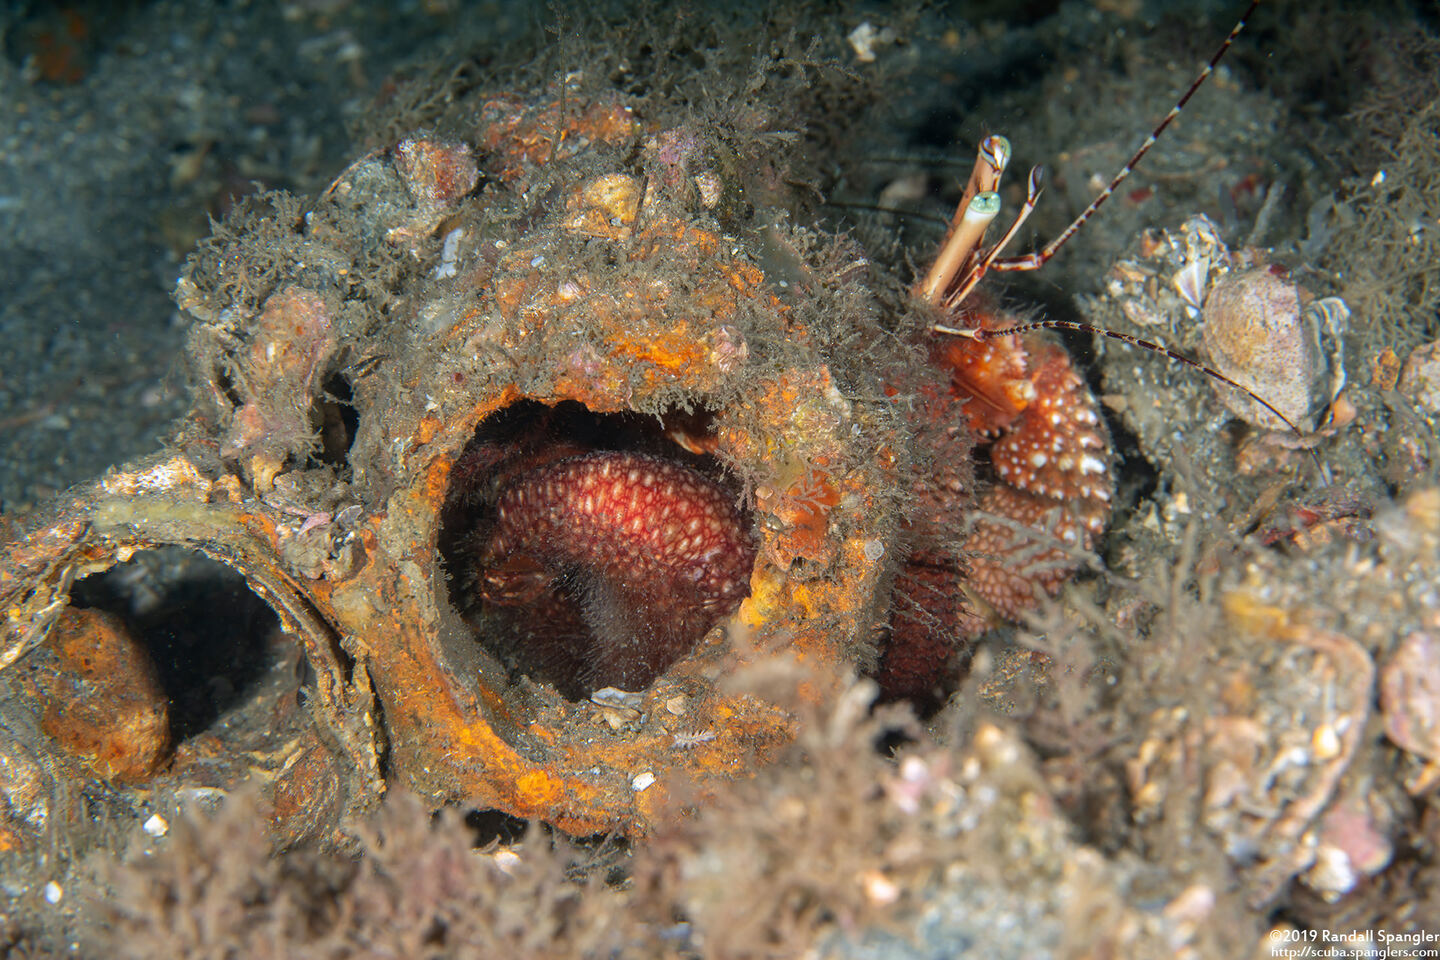 Petrochirus diogenes (Giant Hermit Crab); In a piece of debris where its soft body is visible